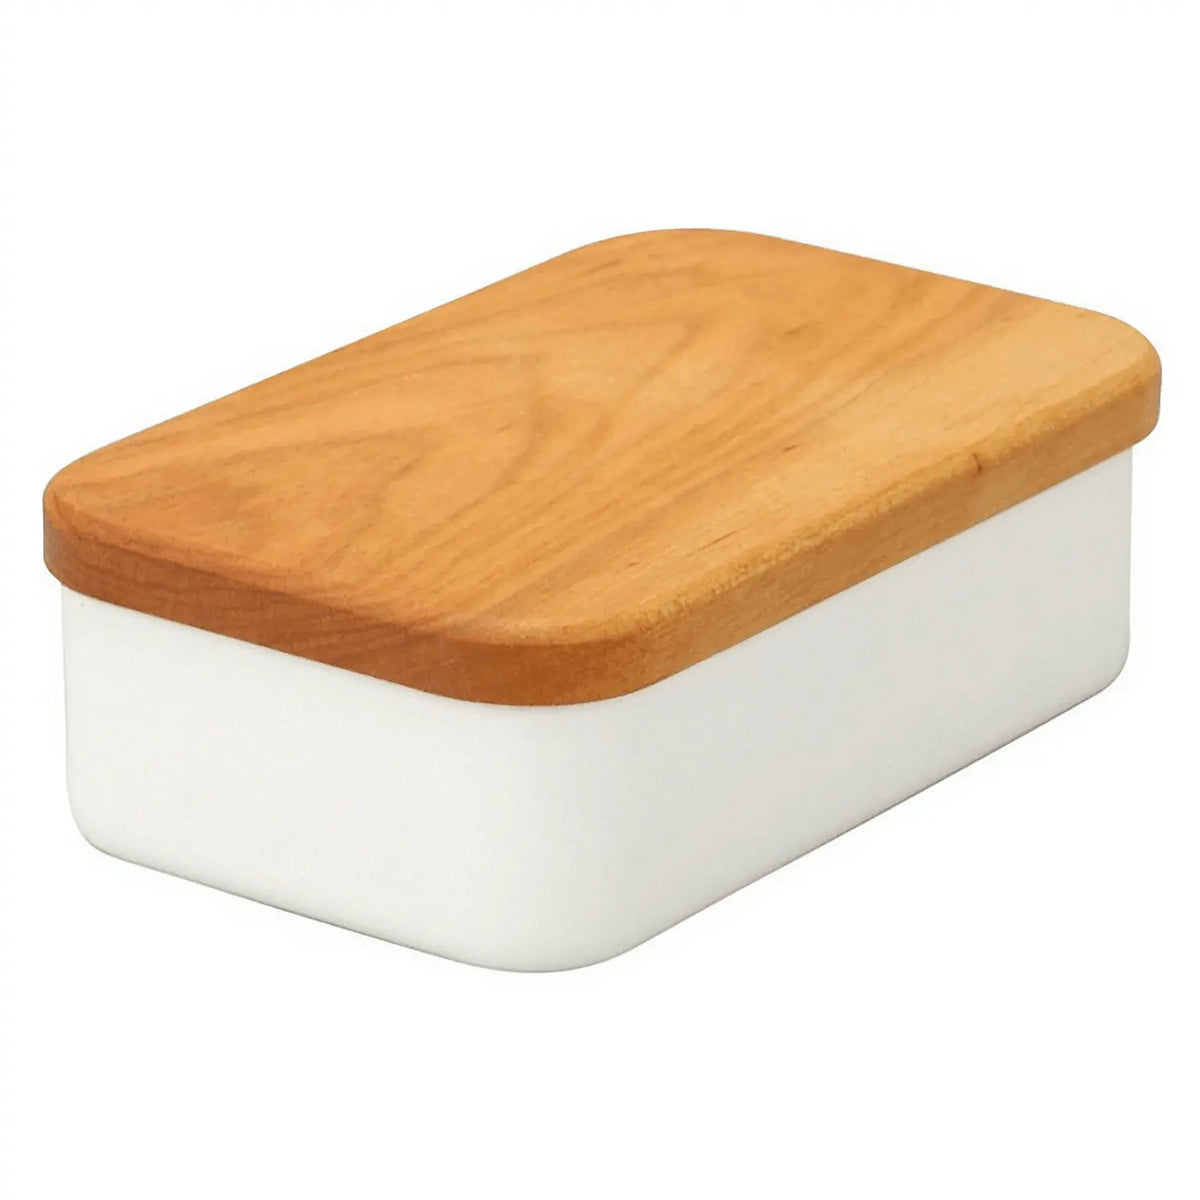 Noda Horo Enamel Butter Dish with Solid Cherry Wood Lid